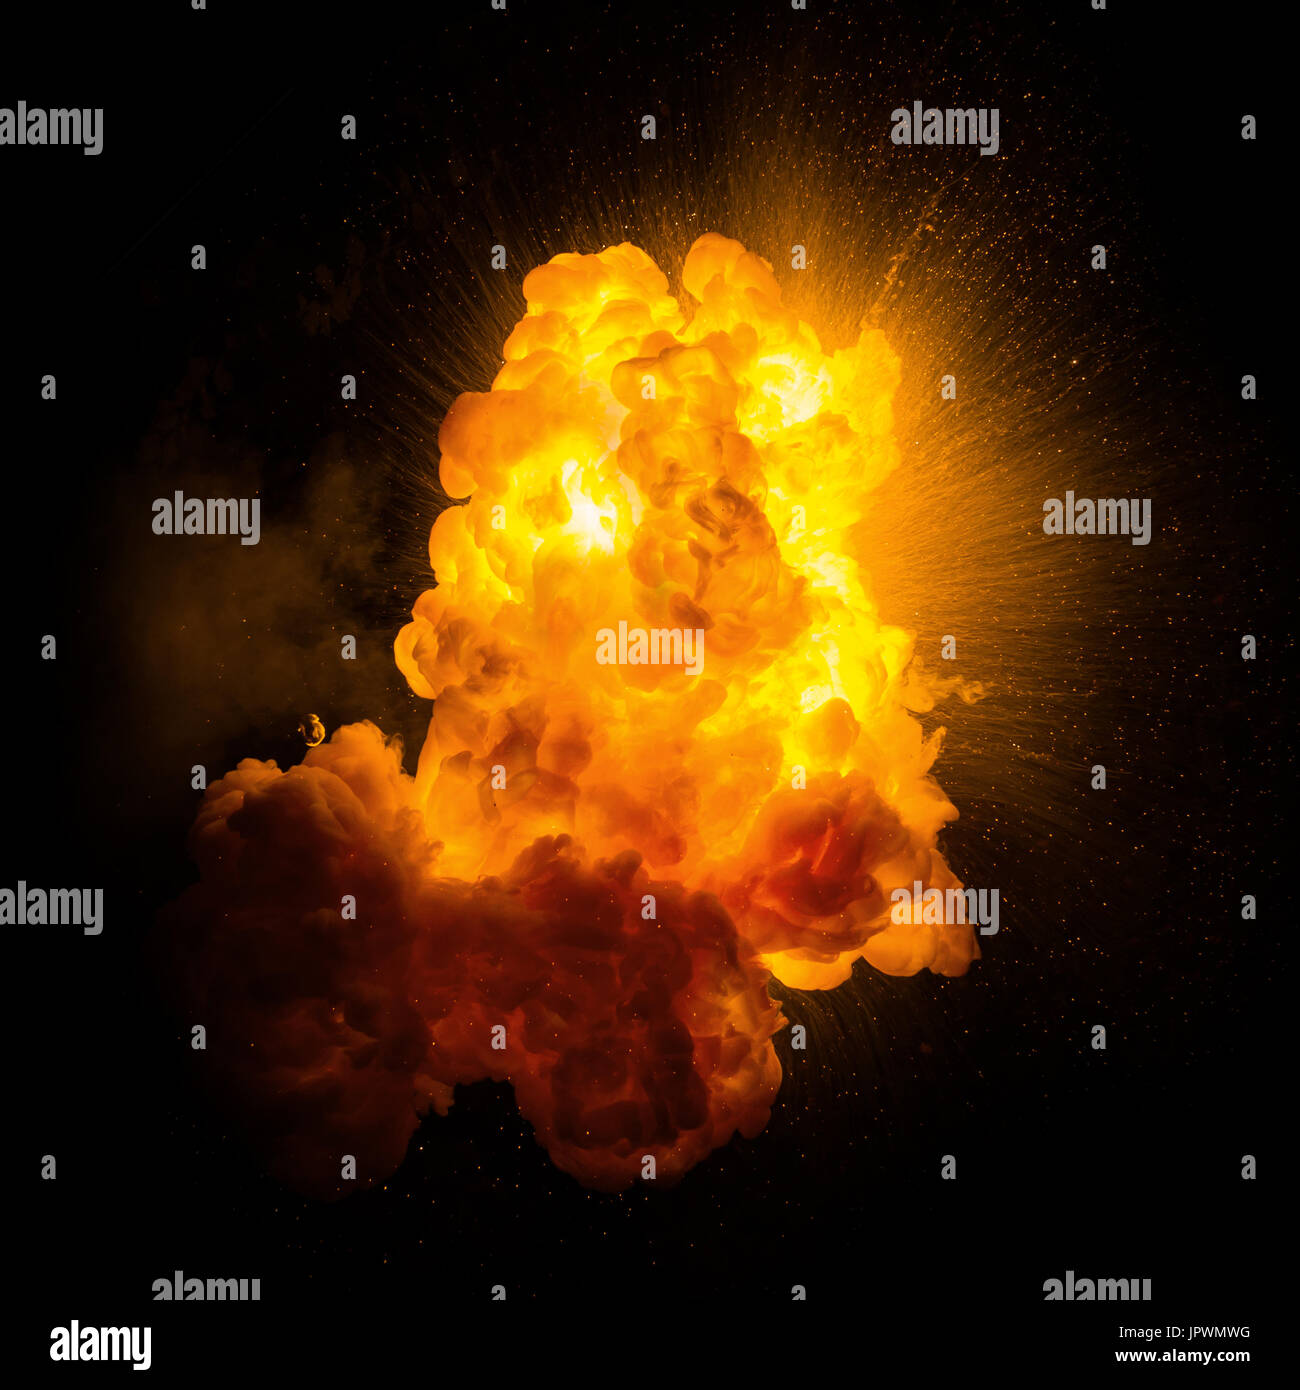 Realistic fiery explosion with sparks over a black background Stock Photo